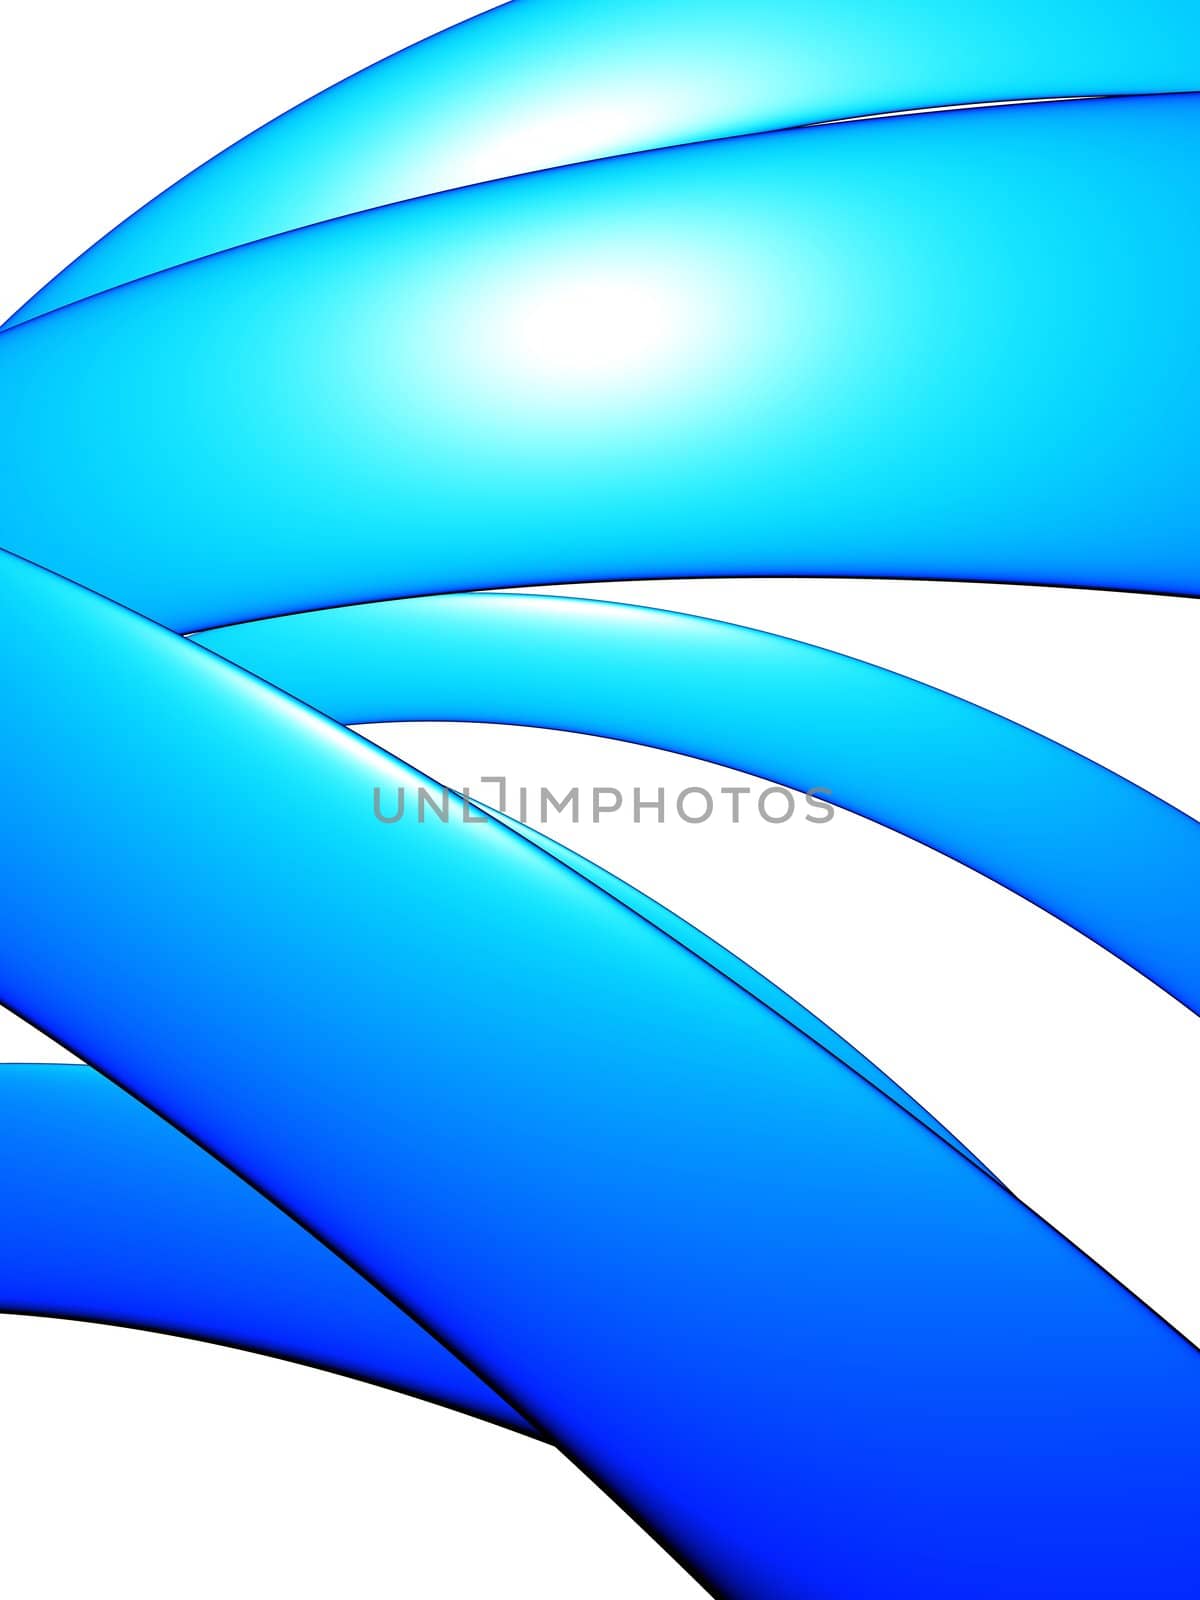 An illustration of ribbons floating on a white background.